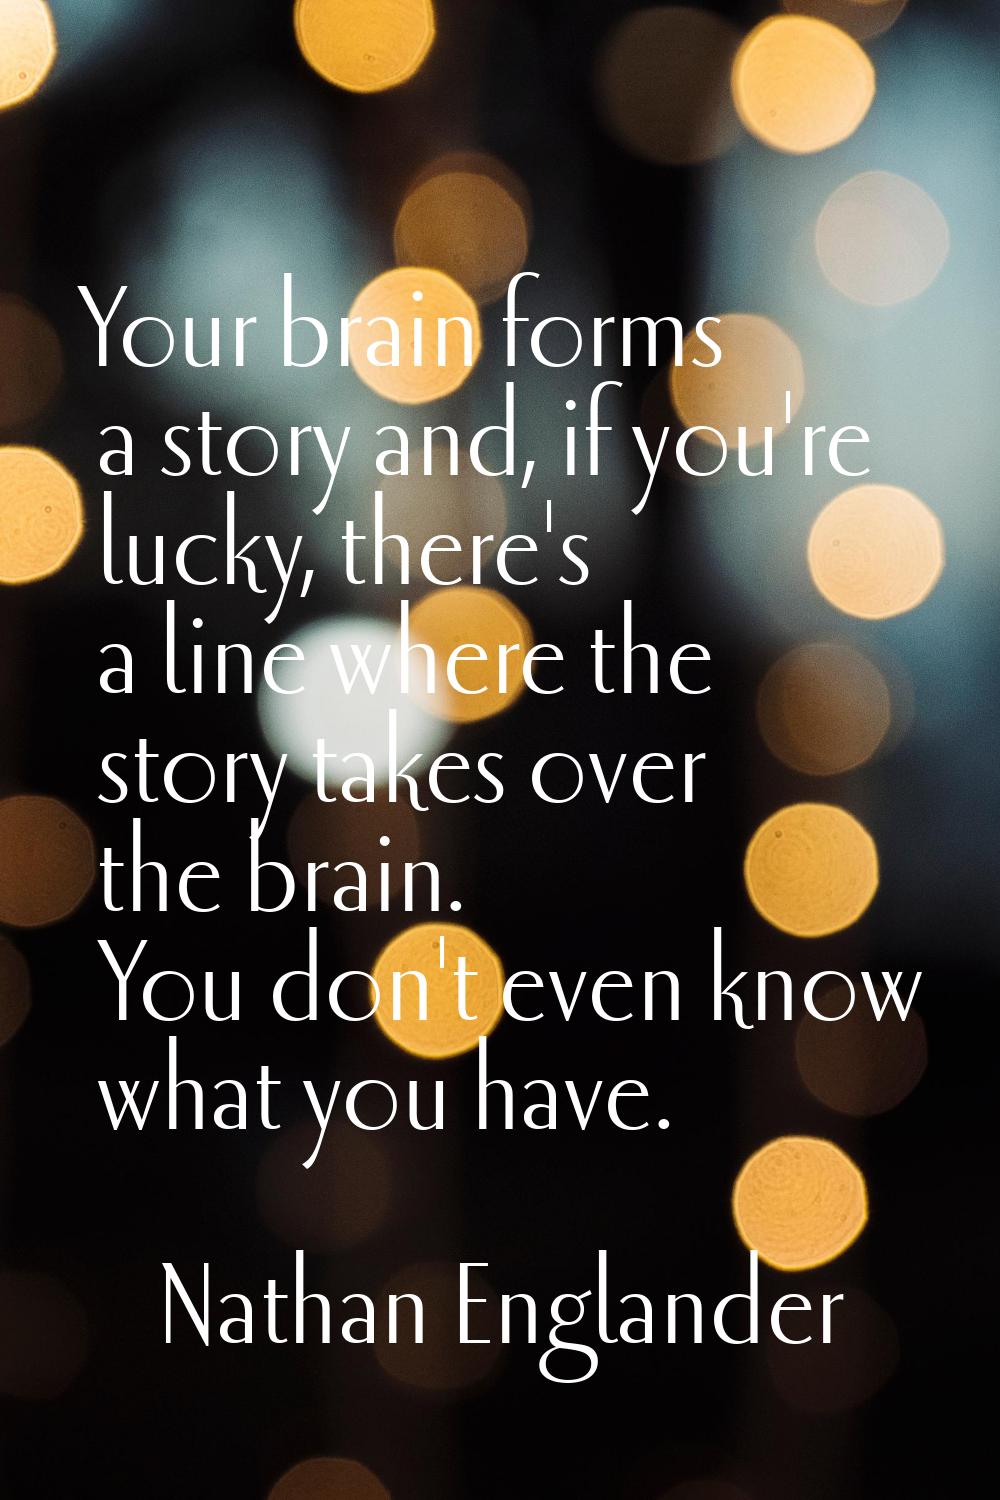 Your brain forms a story and, if you're lucky, there's a line where the story takes over the brain.